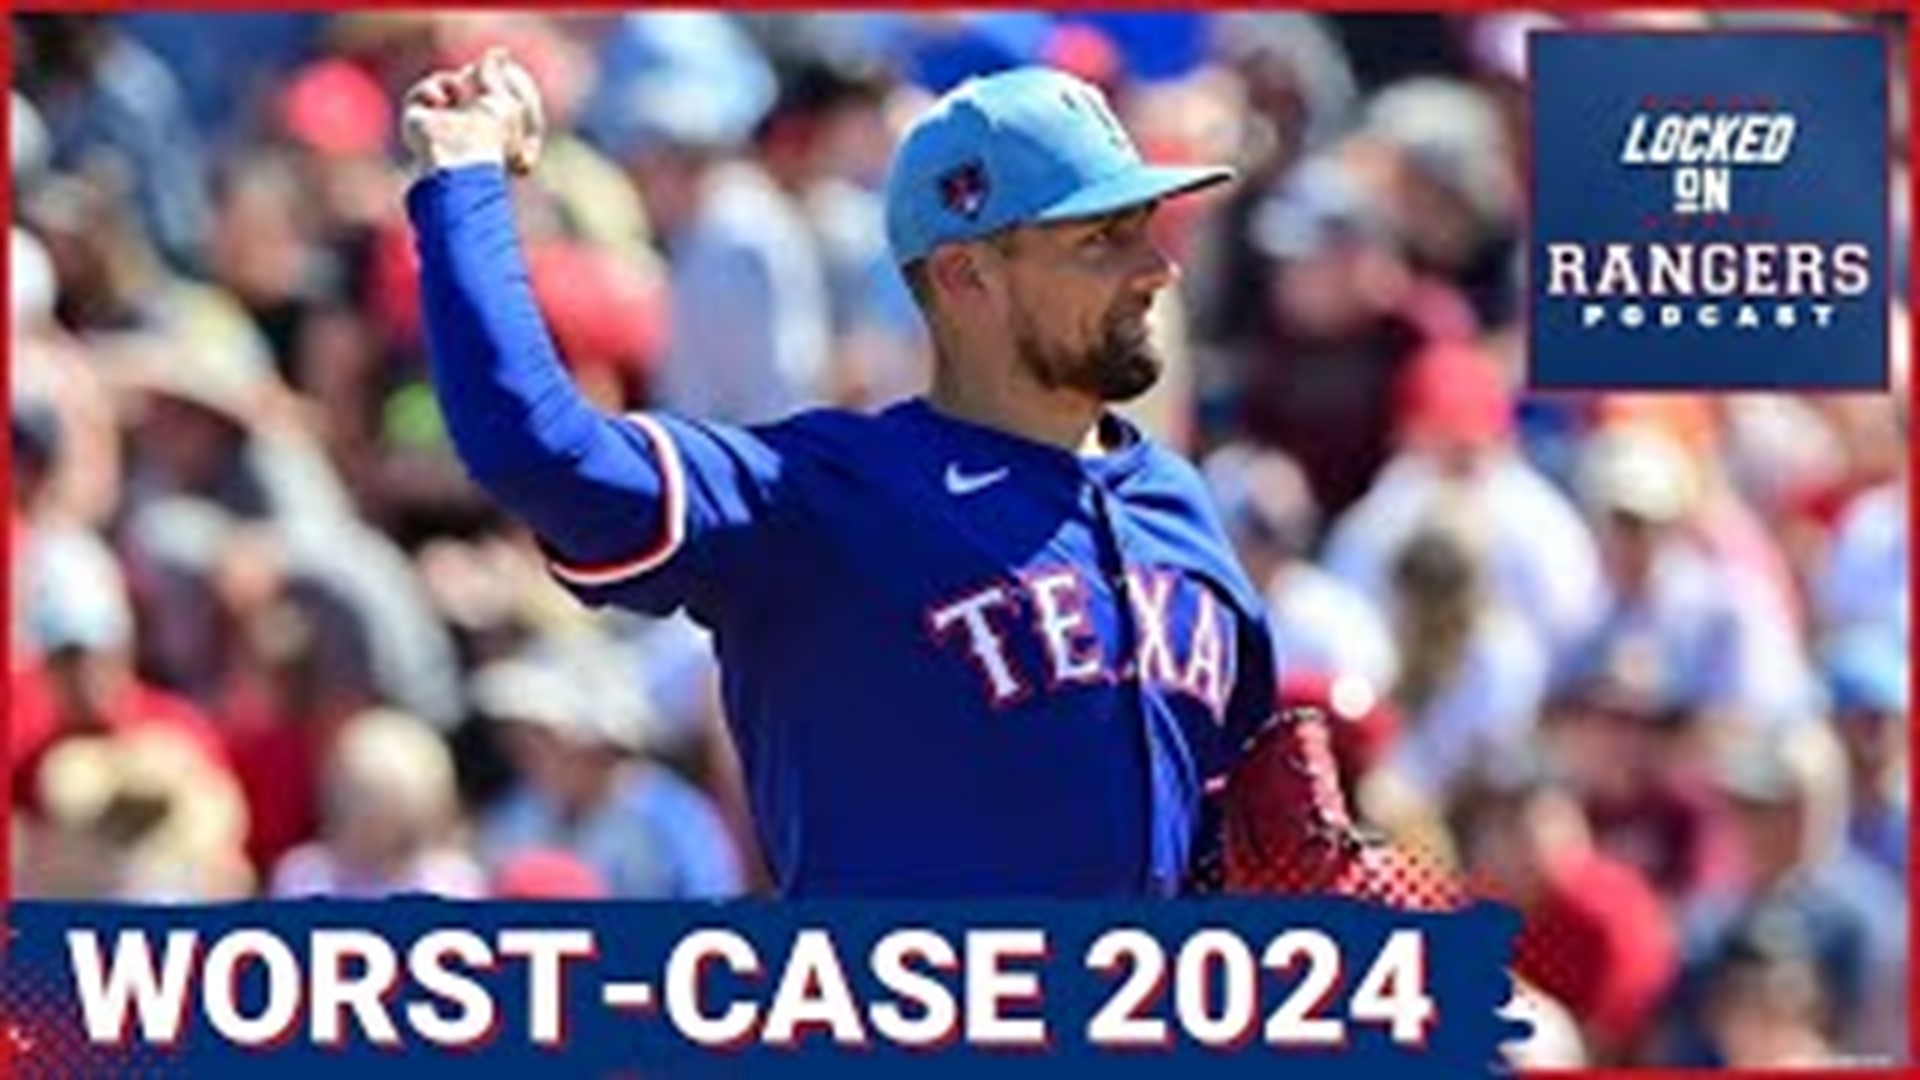 The Texas Rangers come into 2024 as the reigning World Series champions, but still have questions. Nathan Eovaldi's durability in the first half will be important.